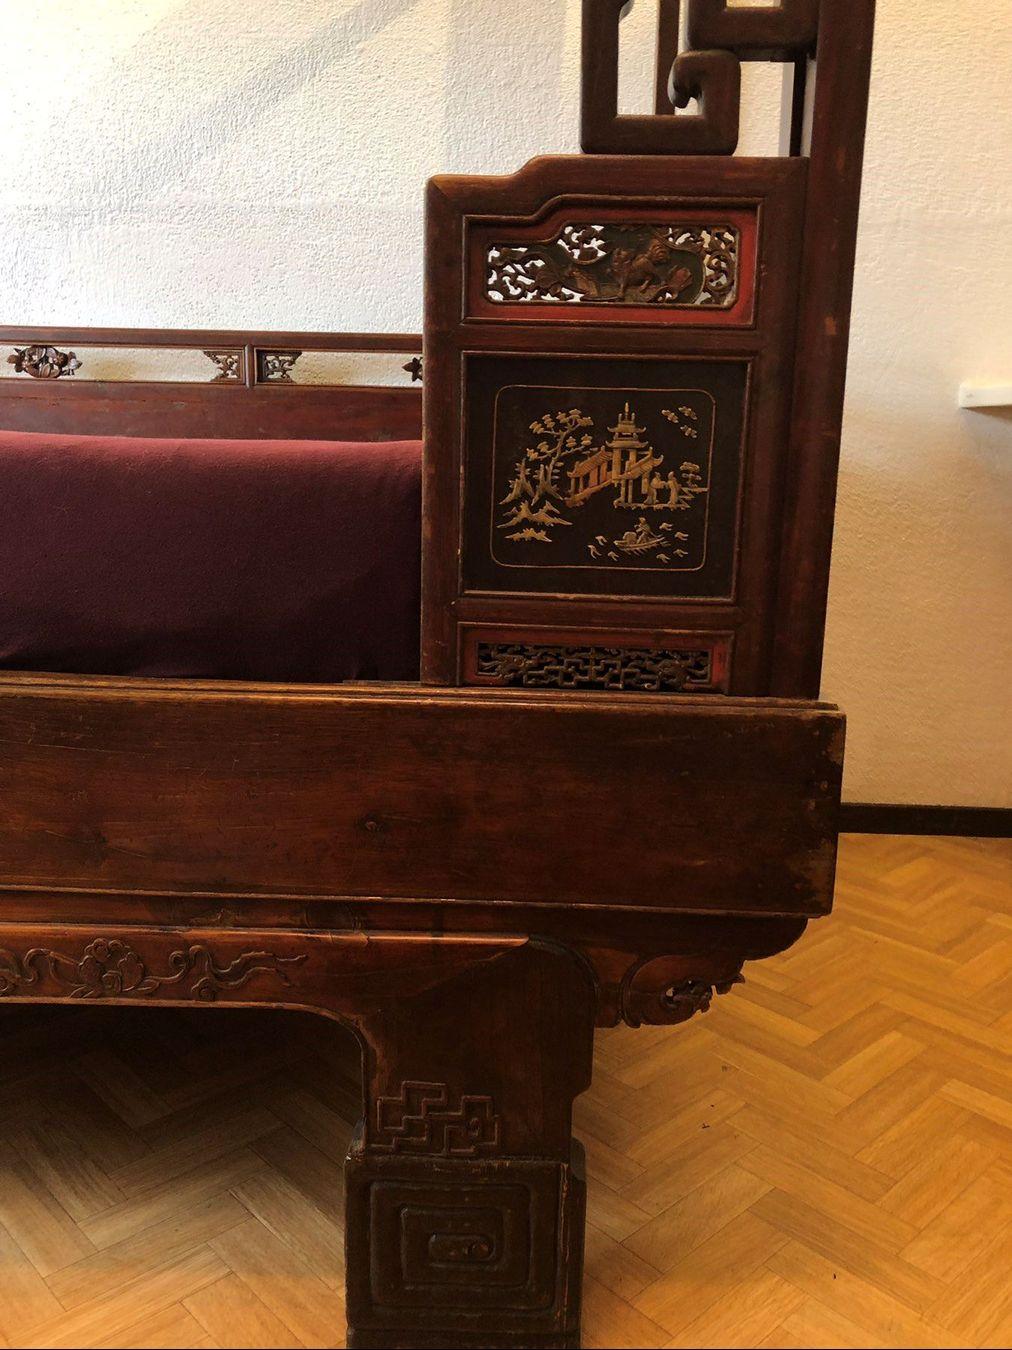 Magnificent antique Princess bed from China
circa 1890, end of the Qing dynasty with beautiful carvings

Measurements: 220 x 216 x 123 cm
Without nails or screws. Wooden joinery technique.

 